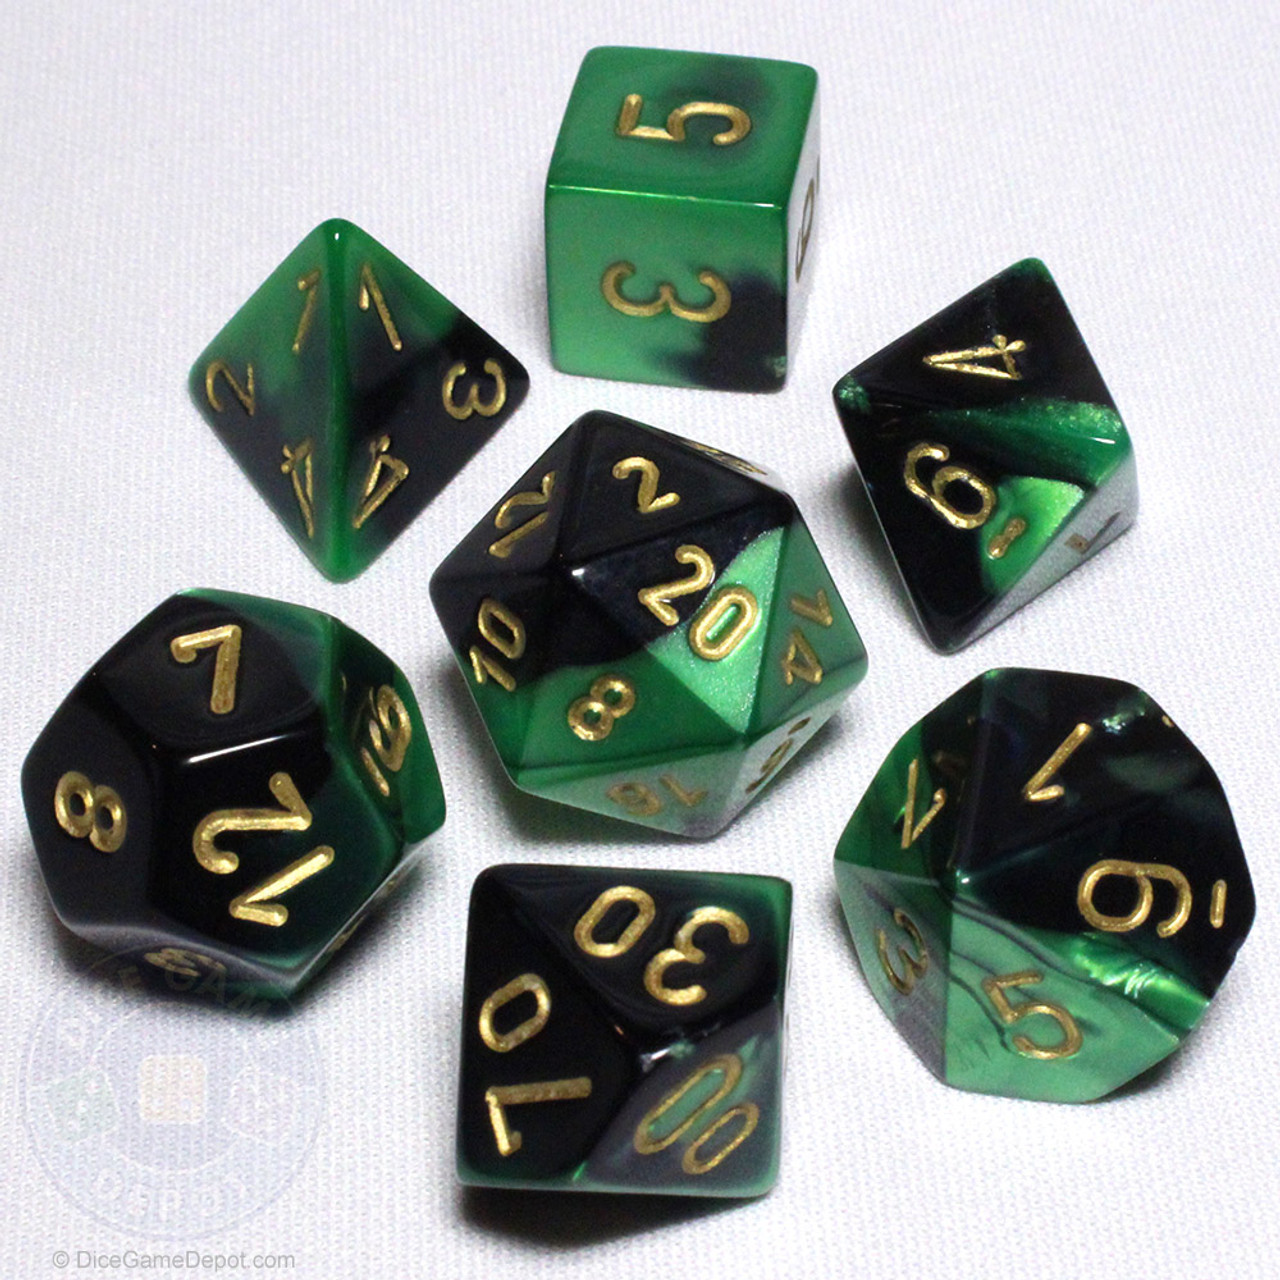 | Dungeons and Dragons White & Yellow Acrylic Dice Set Black Stone DnD Speckled Black DnD